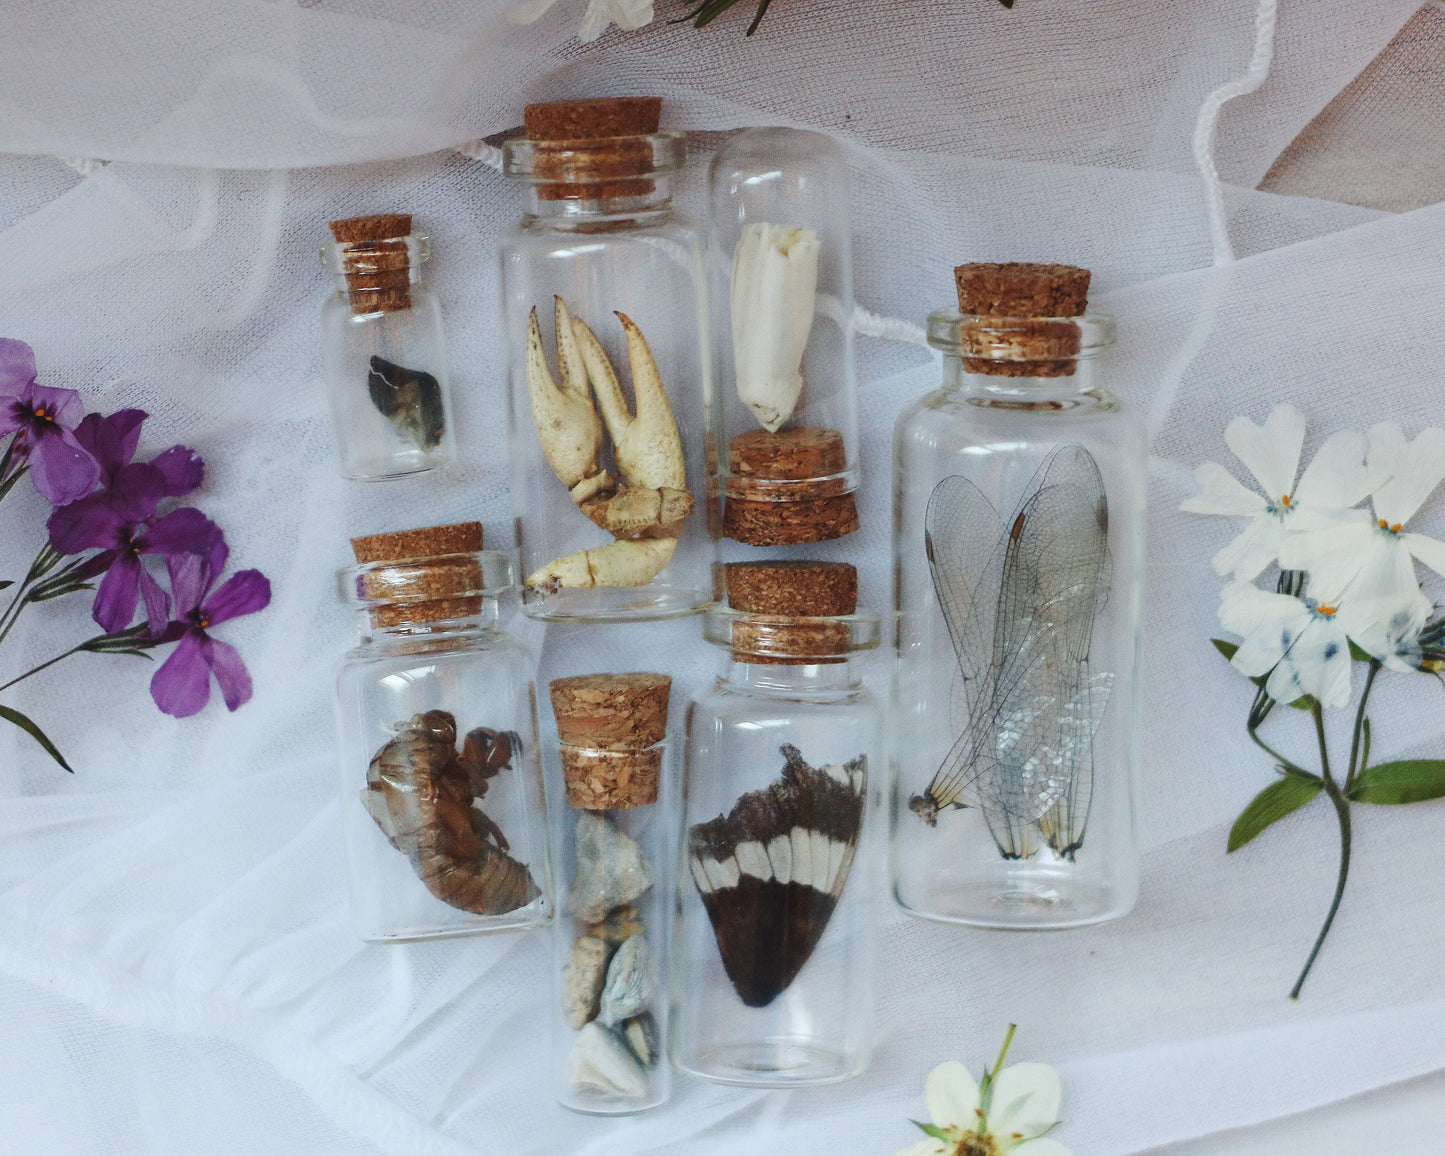 Curiosity Vials Set of 7, Curated Set | Real Ethically Sourced Taxidermy, Animal Bones, Insects, Fossils, and Mystery | Specimen Jars